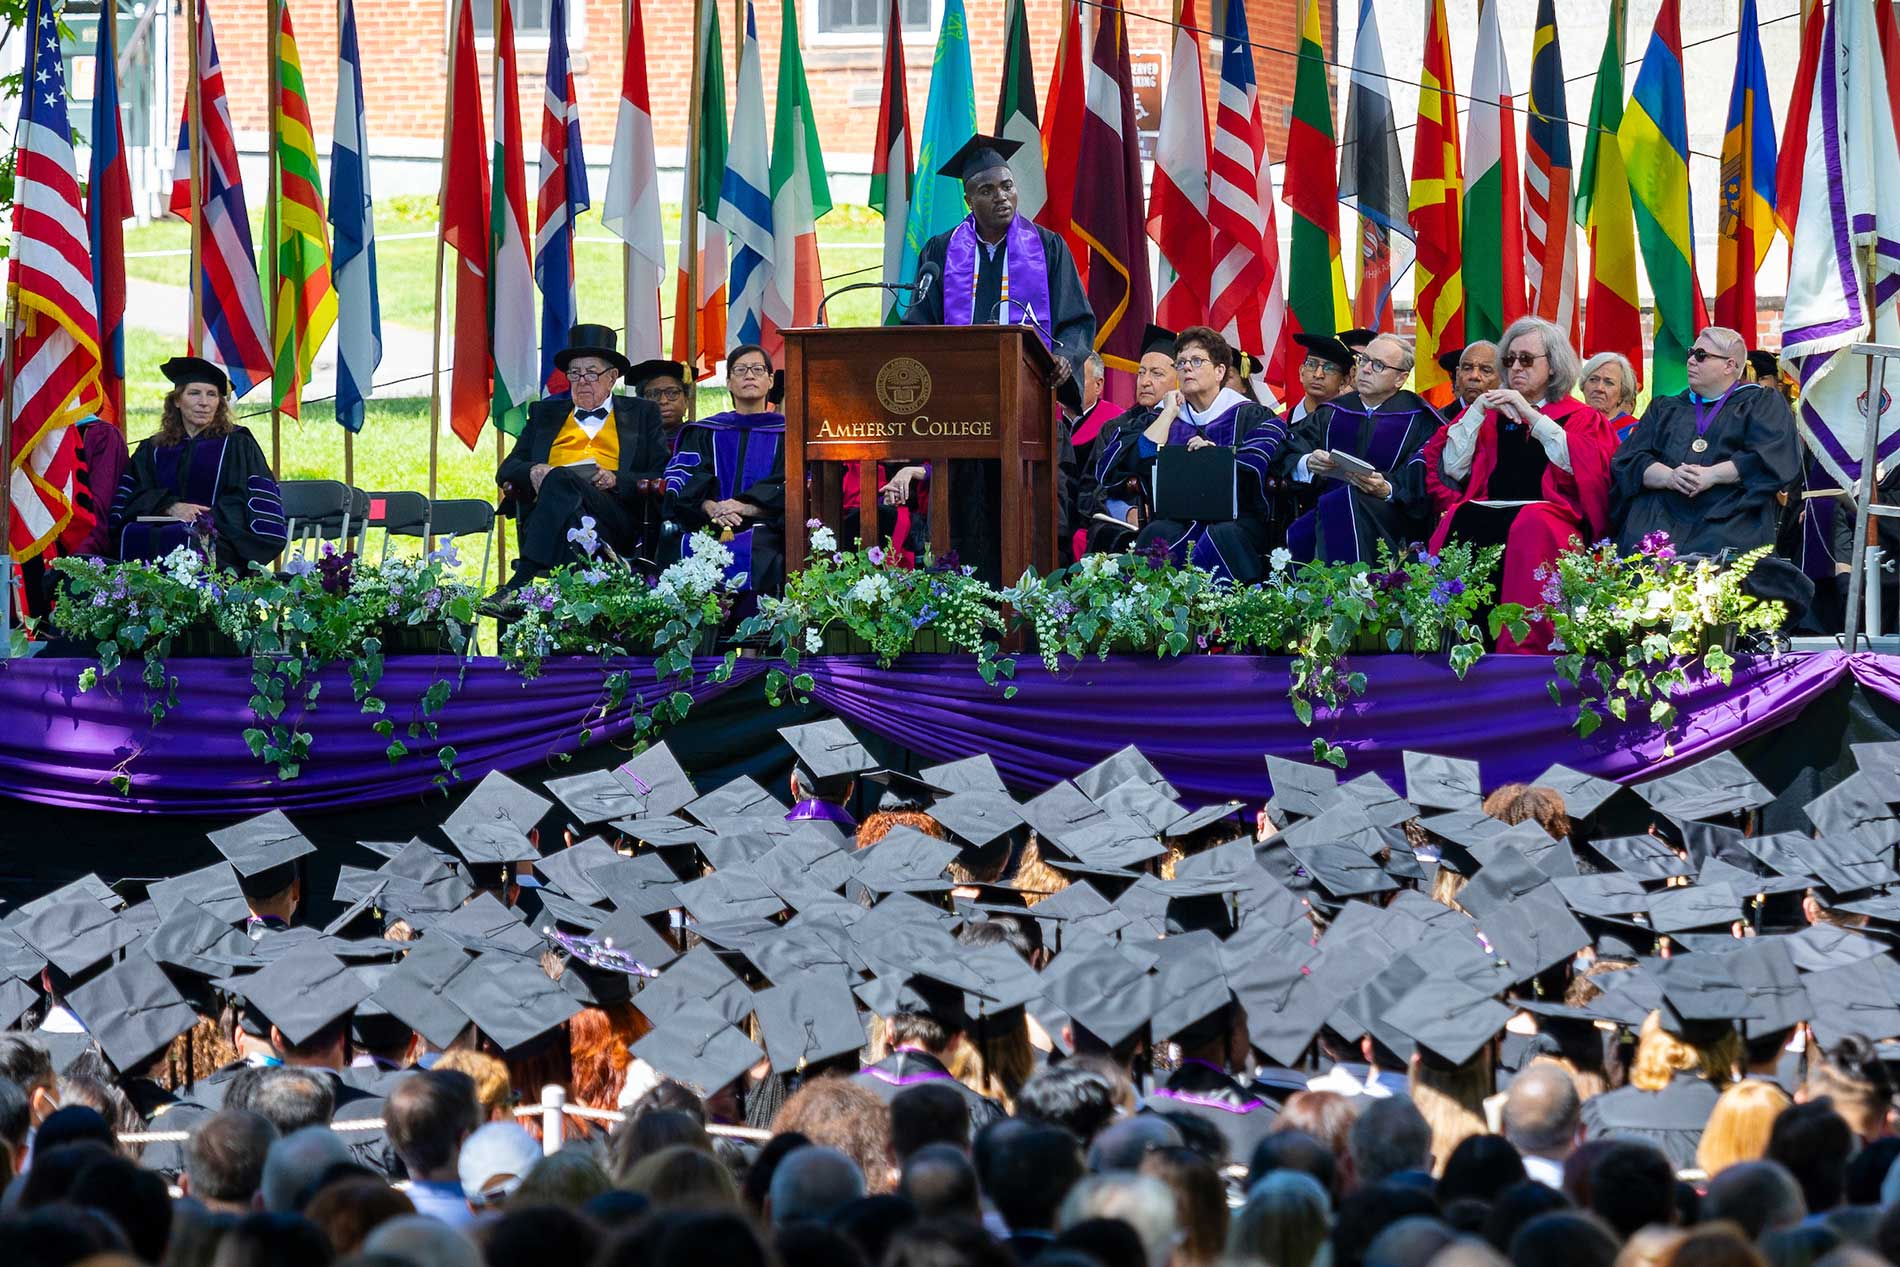 A view of the stage during commencement where faculty and administrators look out at the crowd of graduating seniors.